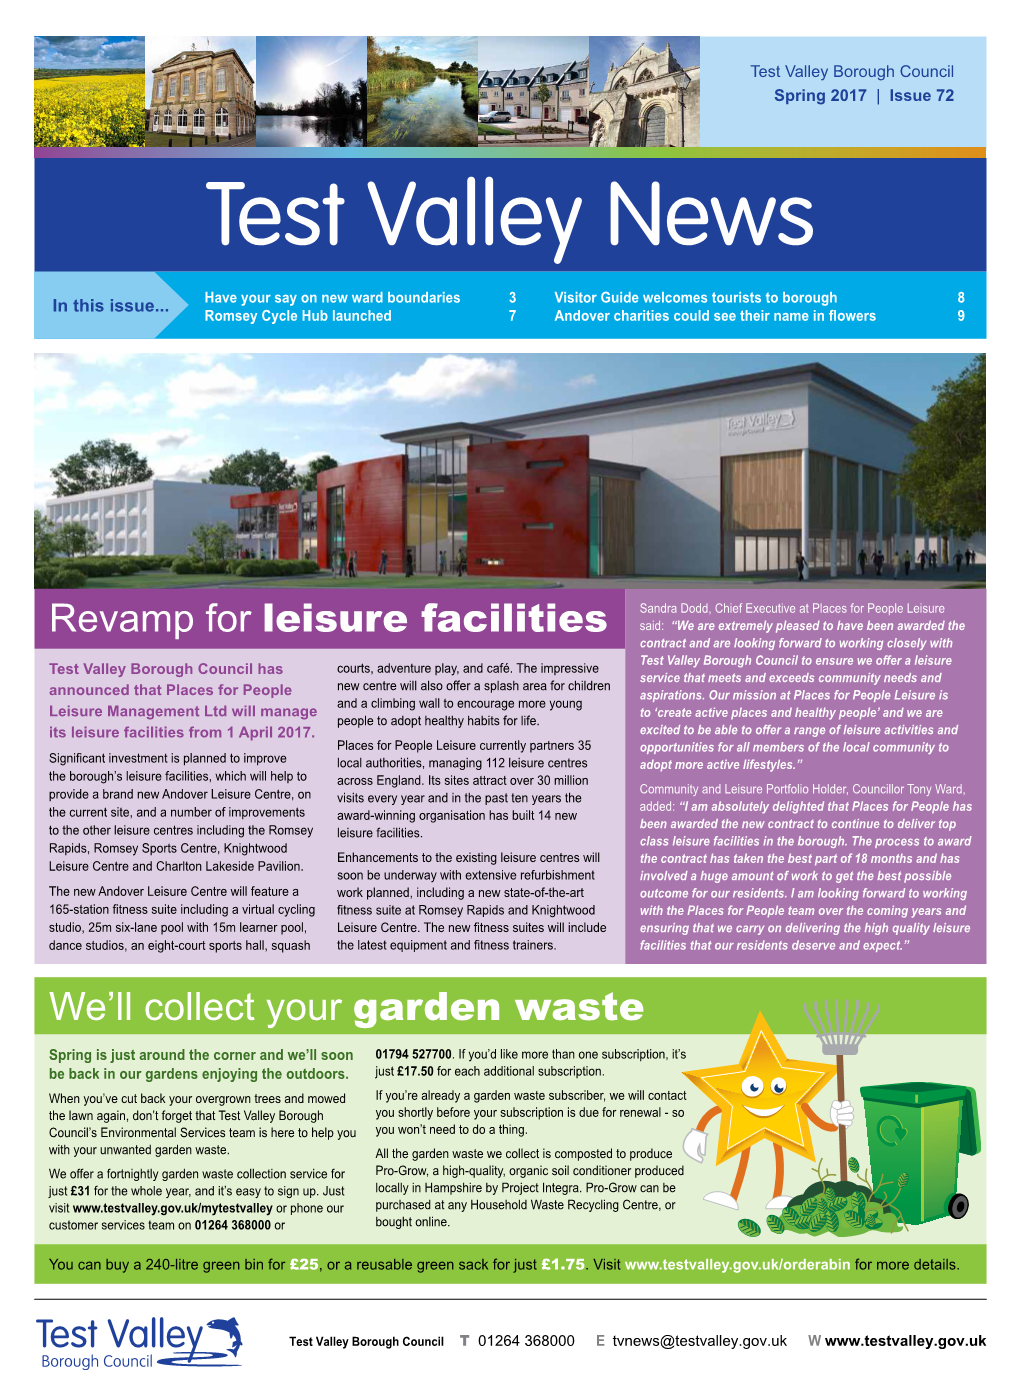 Test Valley News Edition 72 Spring 2017